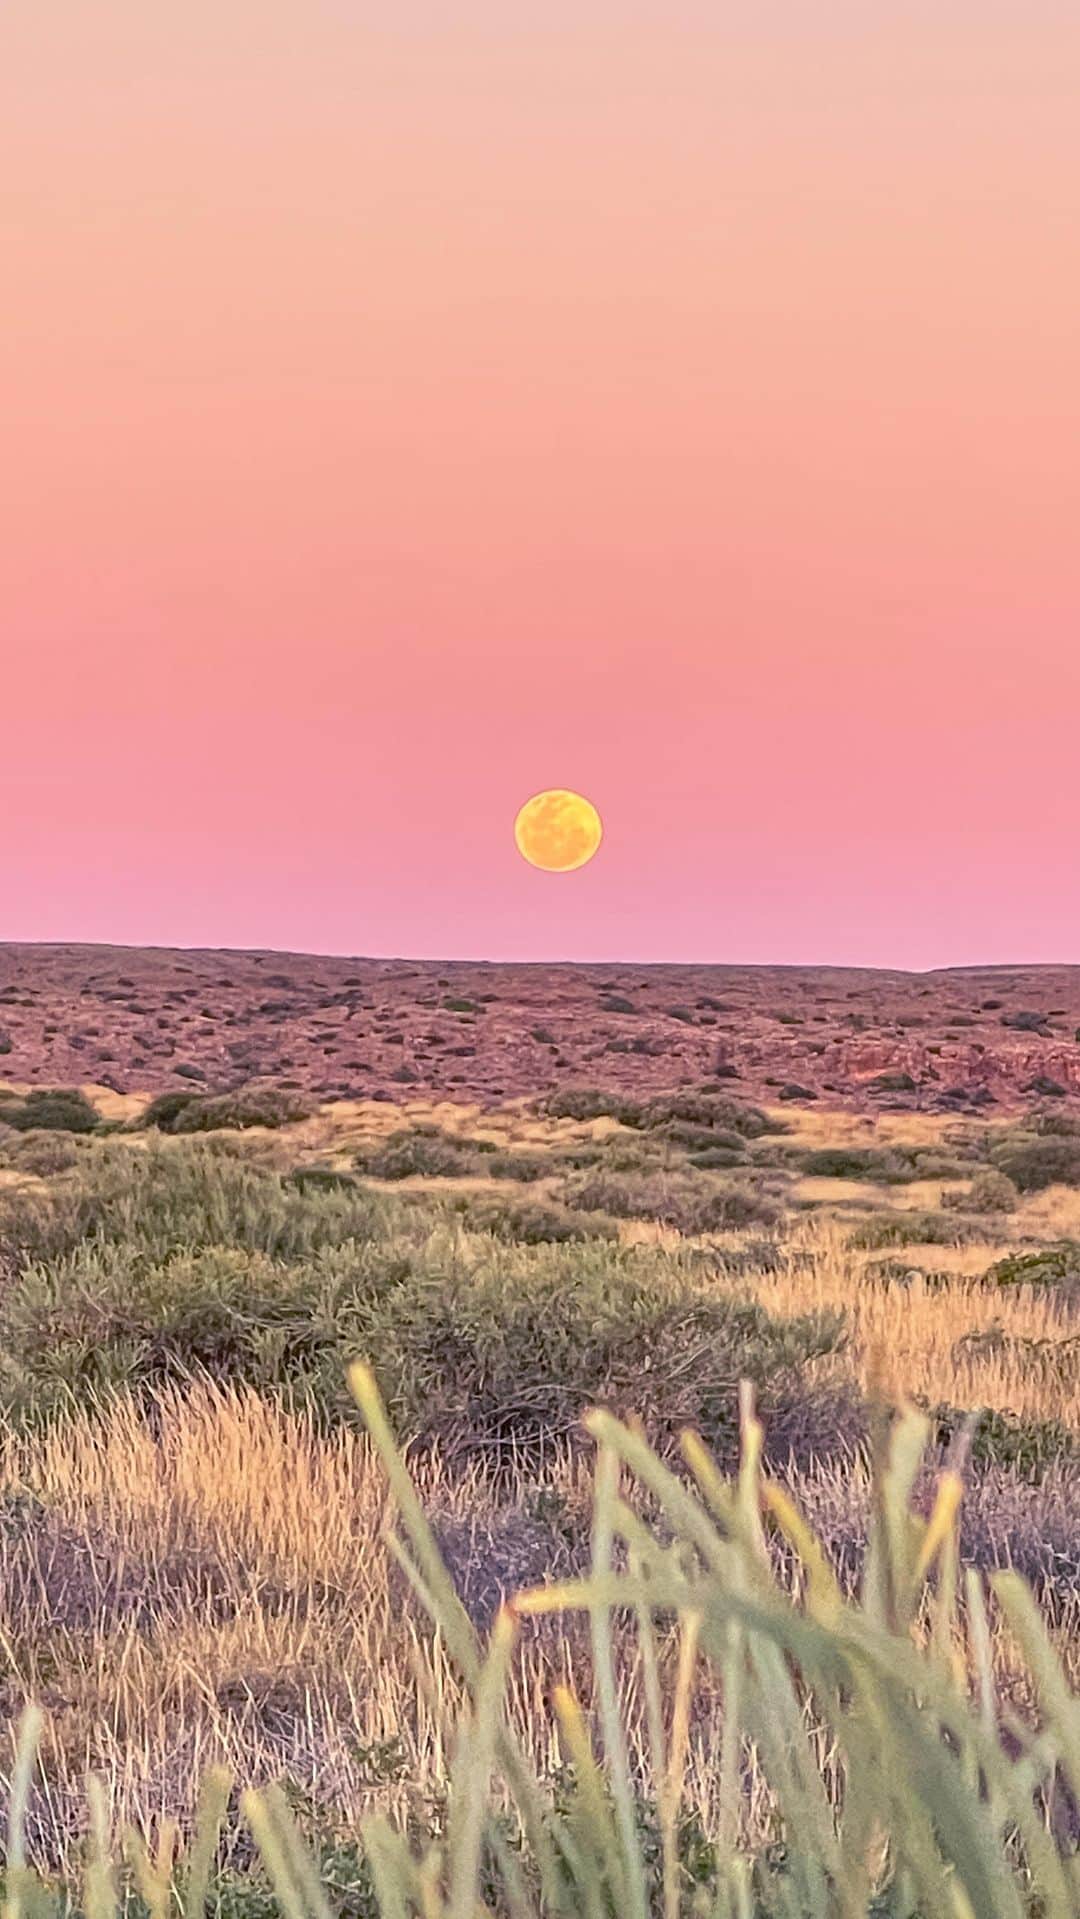 のインスタグラム：「Moon rise magic in Ningaloo 🌙  Imagine paddling in calm crystal clear turquoise water looking at all the stunning coral beneath, watching colourful fish, turtles and dolphins swim by, hearing the sounds of whales breaching, and watching the moon rise against a vivid pastel sky over the range. My idea of heaven 💕  This was filmed a few moons ago in my happy healing place. There’s something so special about Ningaloo that always make me feel alive. After weeks off grid, in the ocean each day, so much of my pain subsided and the stiffness in my hands was one of my only symptoms by the end of the trip. Nature at its finest. There is something very powerfully healing for the soul, for the microbiome, for the nervous system and for the immune system when we immerse ourselves in richly biodiverse environments 🌏  And while I can’t be there right now I’m spending my days rewatching videos of swimming with turtles and padding with dolphins and it’s bringing back all those incredibly heartwarming feelings 🐢🐬🐋🐠   I’m also currently reading @soulstokenovel a book written by the talented WA writer Shannon Sullivan, a healing, self discovery journey to this magical part of the world. Proceeds of the book go to @protectningaloo who do the important work of ensuring this pristine paradise continues. Their vital role helps to protect marine life and the eco system so future generations will have the opportunity to experience it’s magic 🪸🌊」